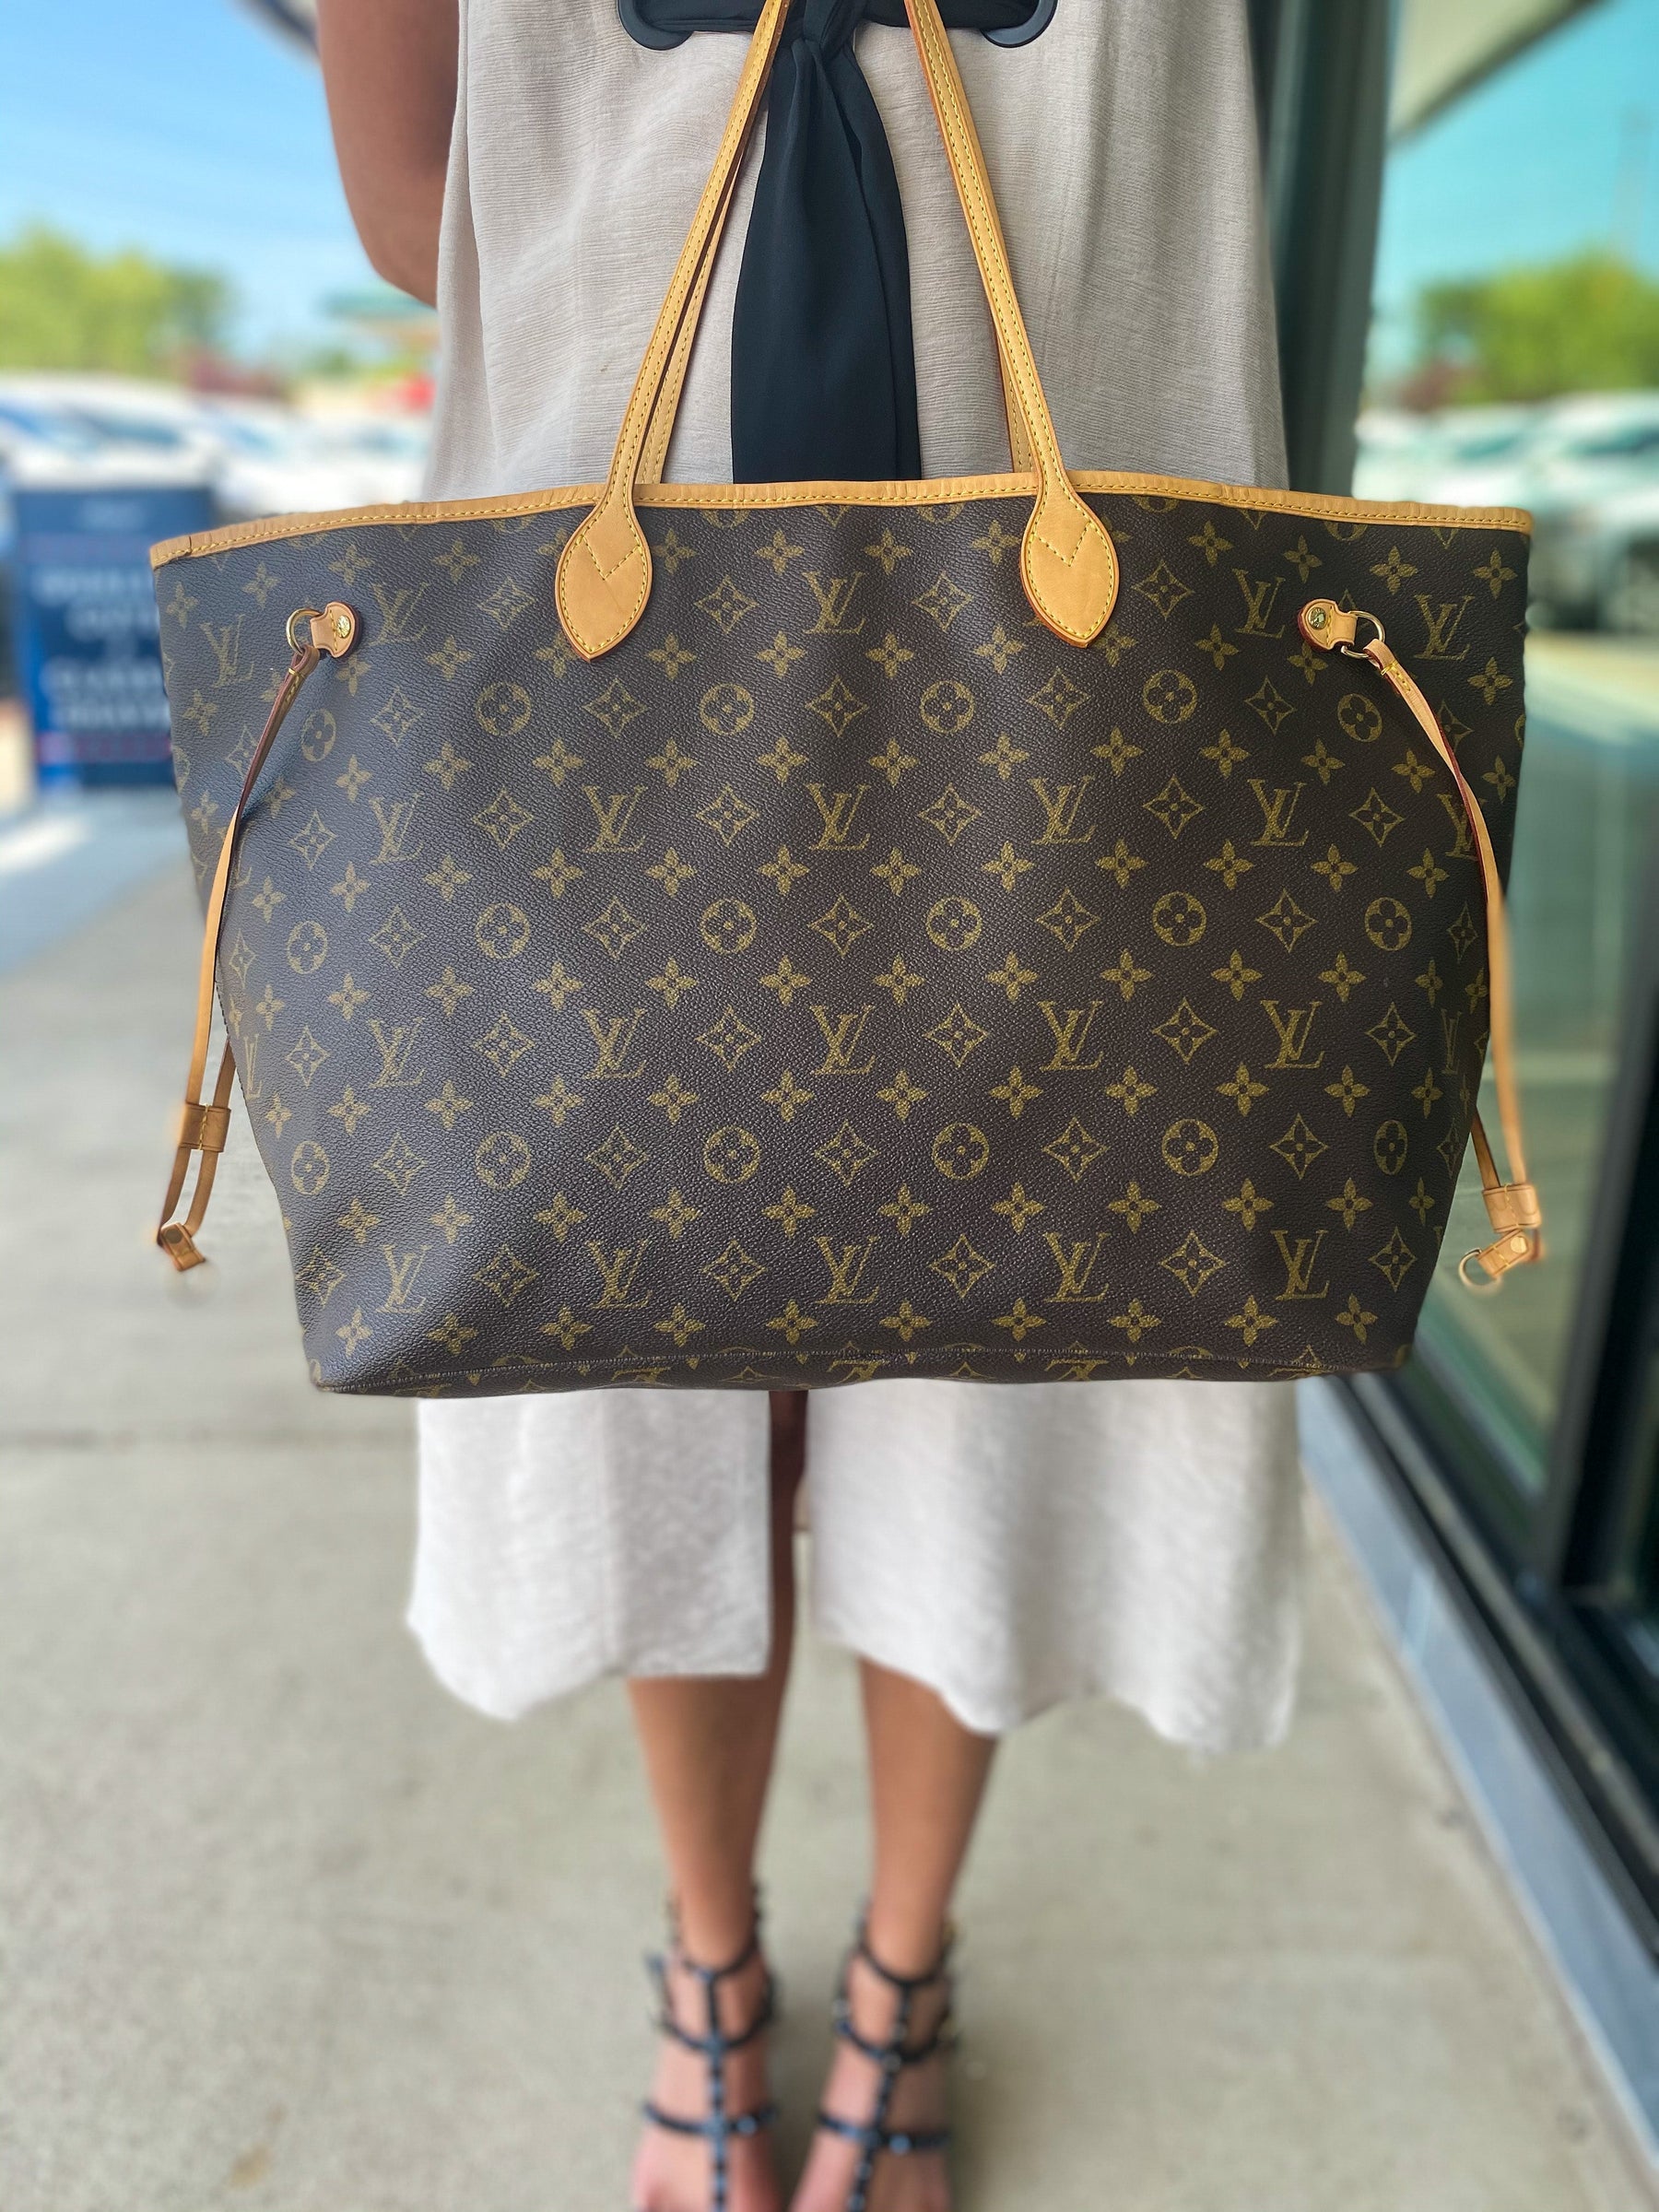 neverfull tote bag louis vuittons